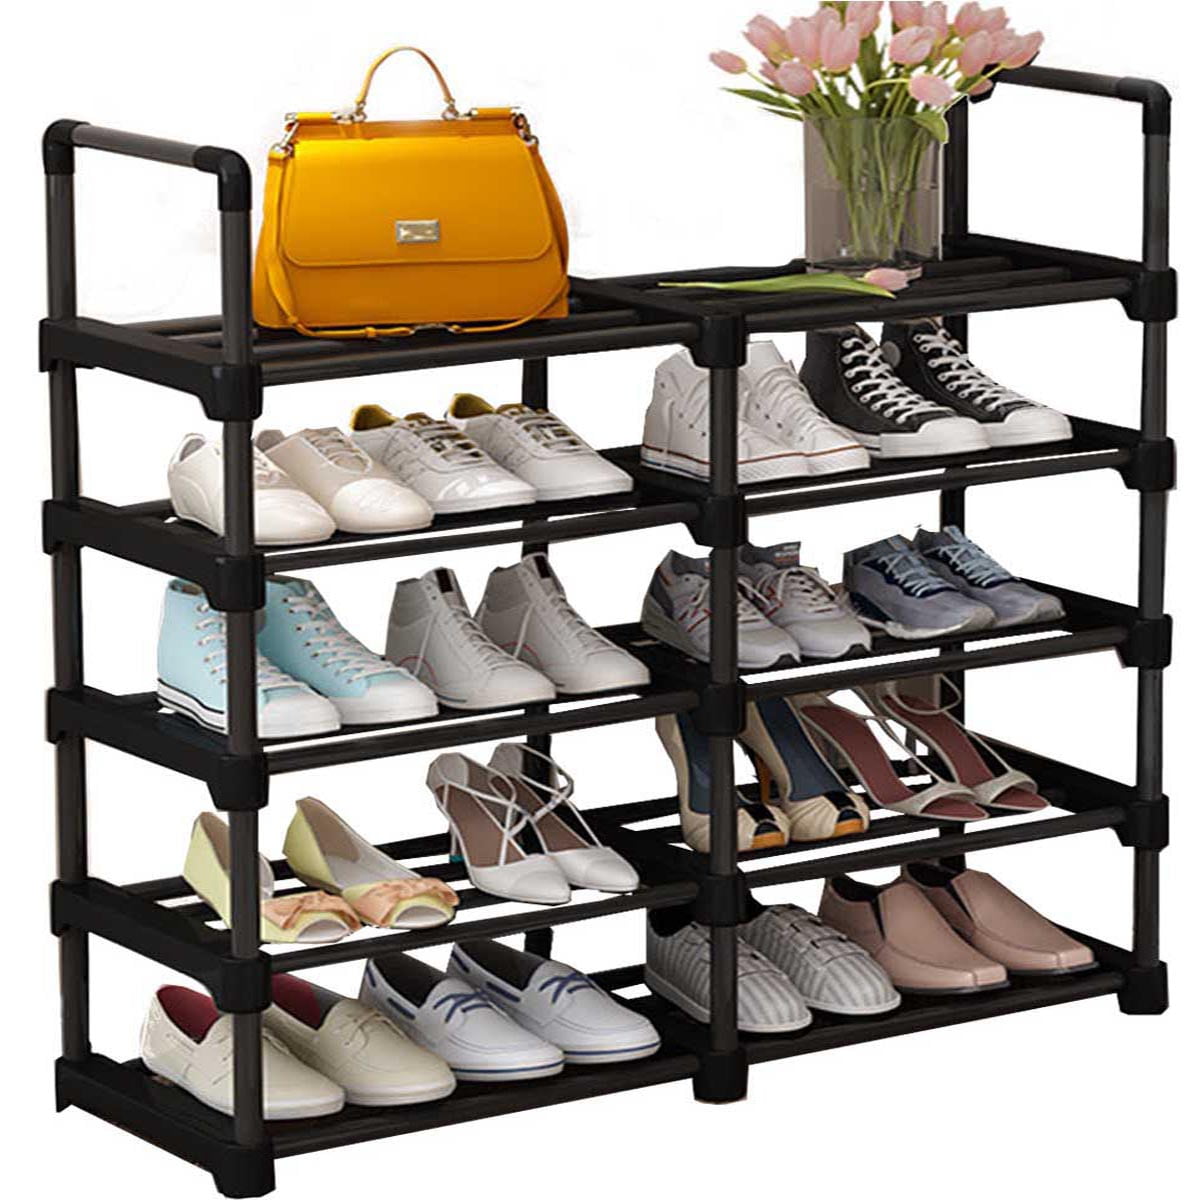 SHOES,CLOTHS,TOOLS,OFFICE ACCESSORIES HANGING STORES/ORGANISER & PROTECT STORAGE 